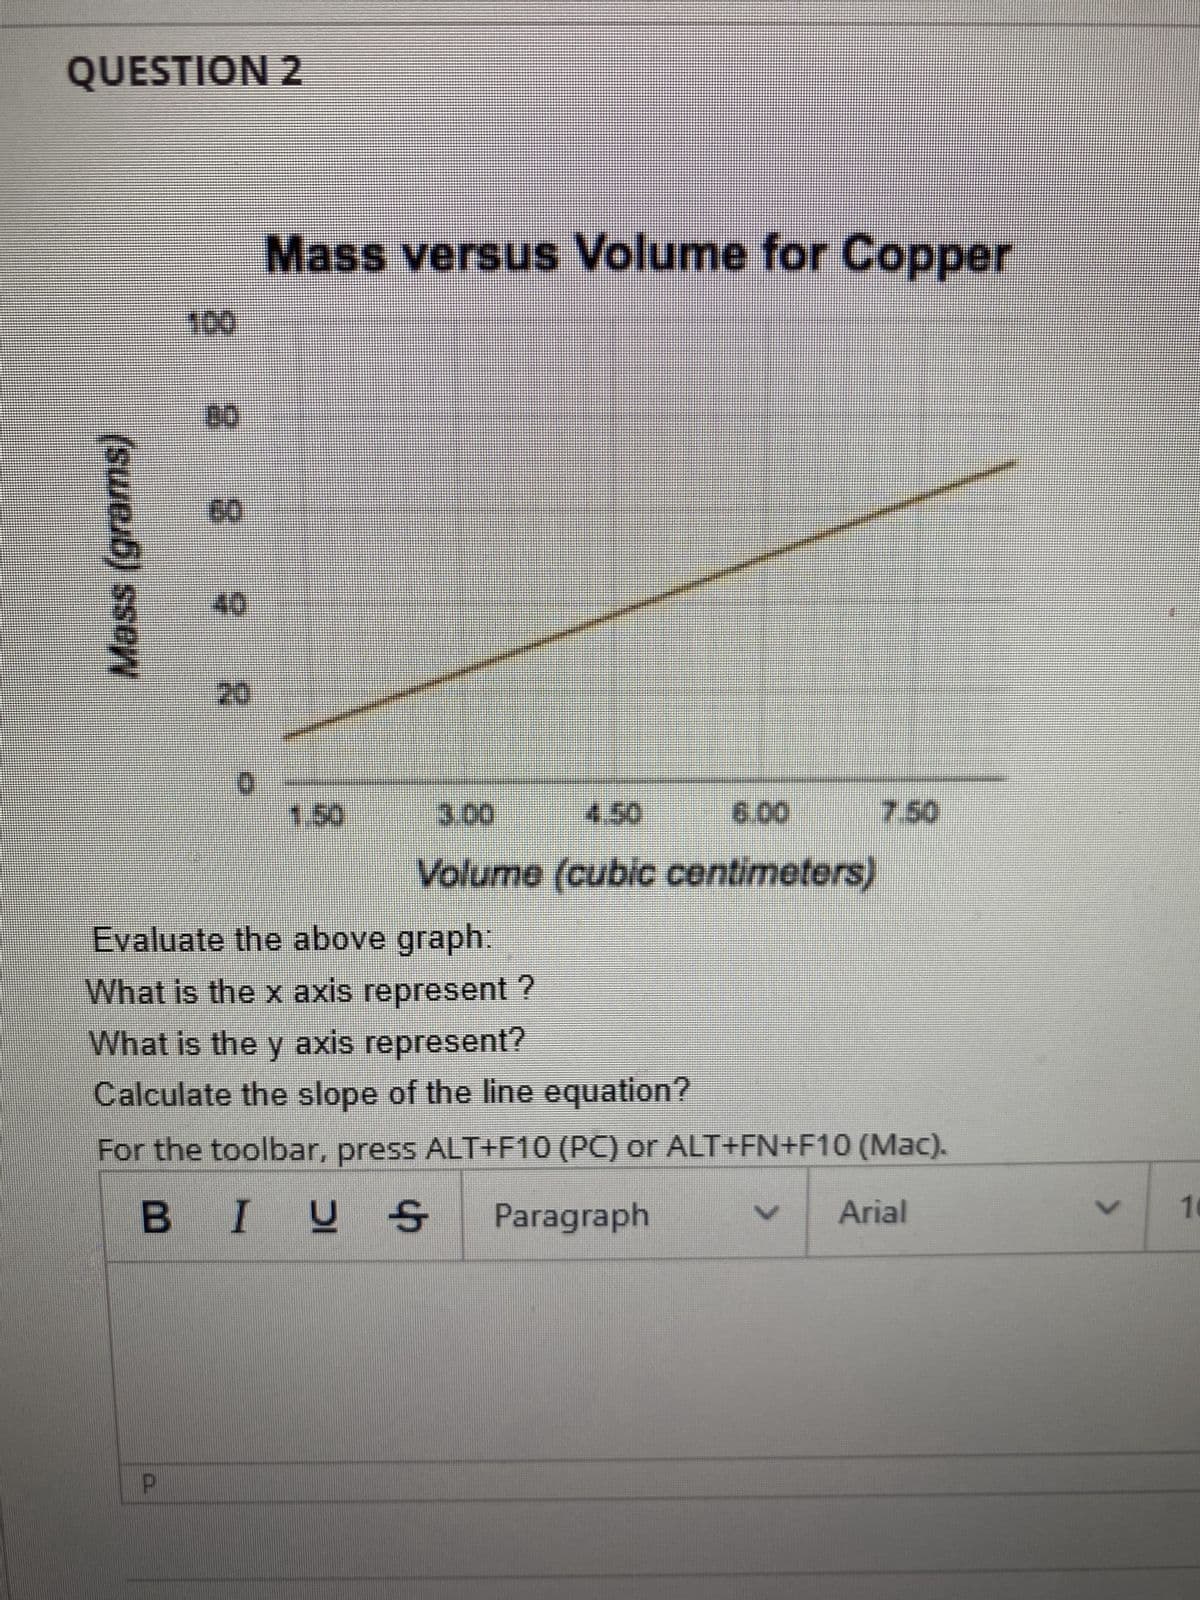 QUESTION 2
Mass (grams)
100
8 8
40
R
Mass versus Volume for Copper
1.50
3.00
4.50
6.00
Volume (cubic centimeters)
7.50
Evaluate the above graph:
What is the x axis represent?
What is the y axis represent?
Calculate the slope of the line equation?
For the toolbar, press ALT+F10 (PC) or ALT+FN+F10 (Mac).
BIUS
Paragraph
Arial
>
10